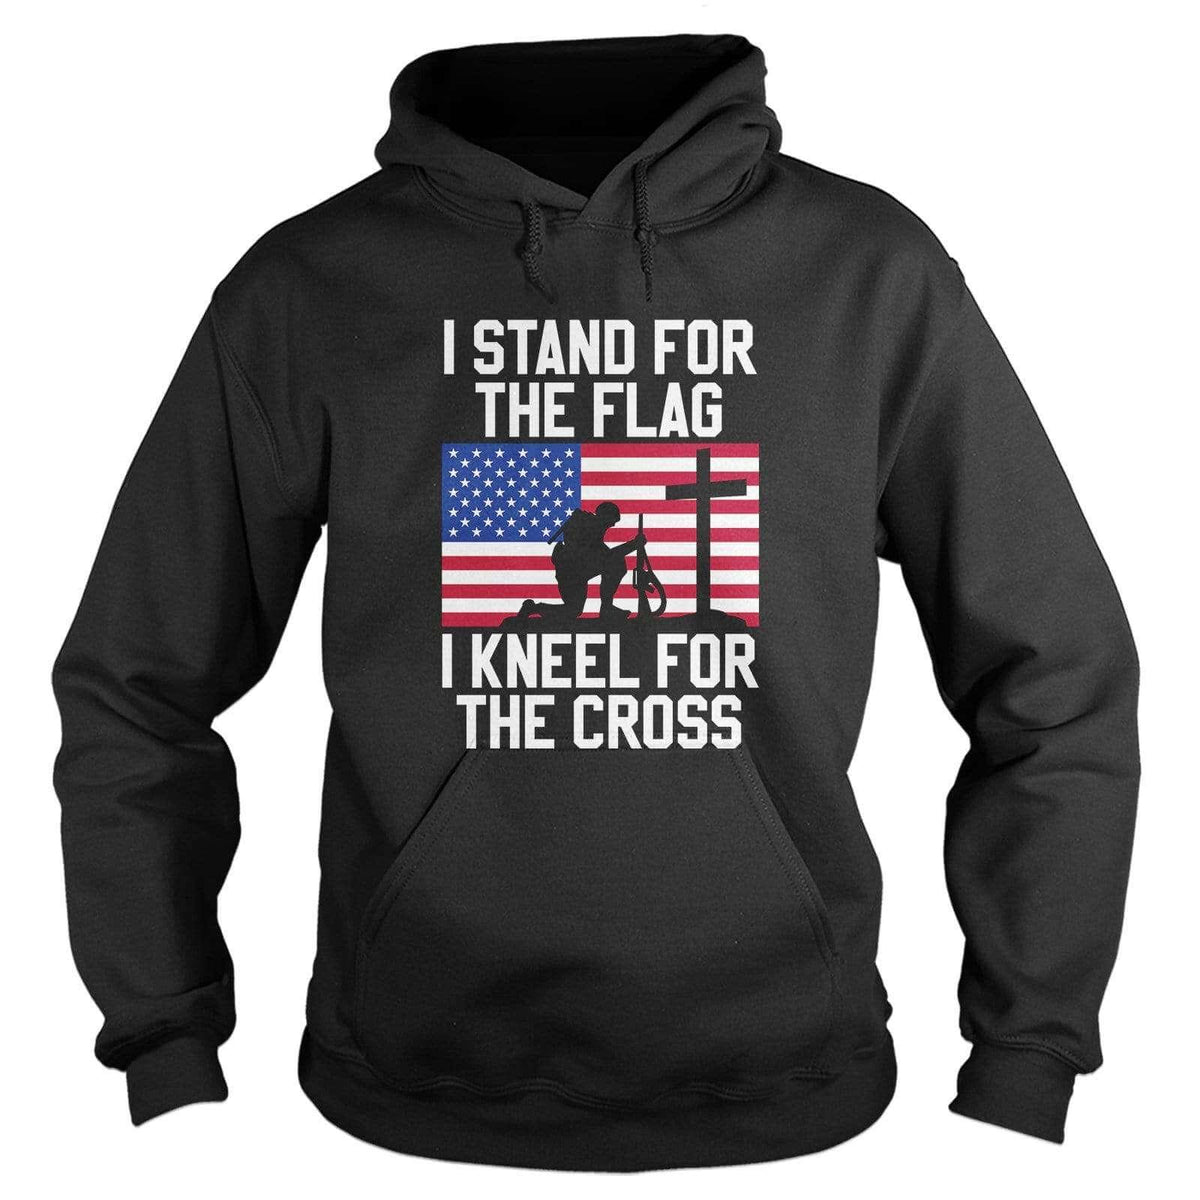 I Stand for the Flag Hoodie - Our True God